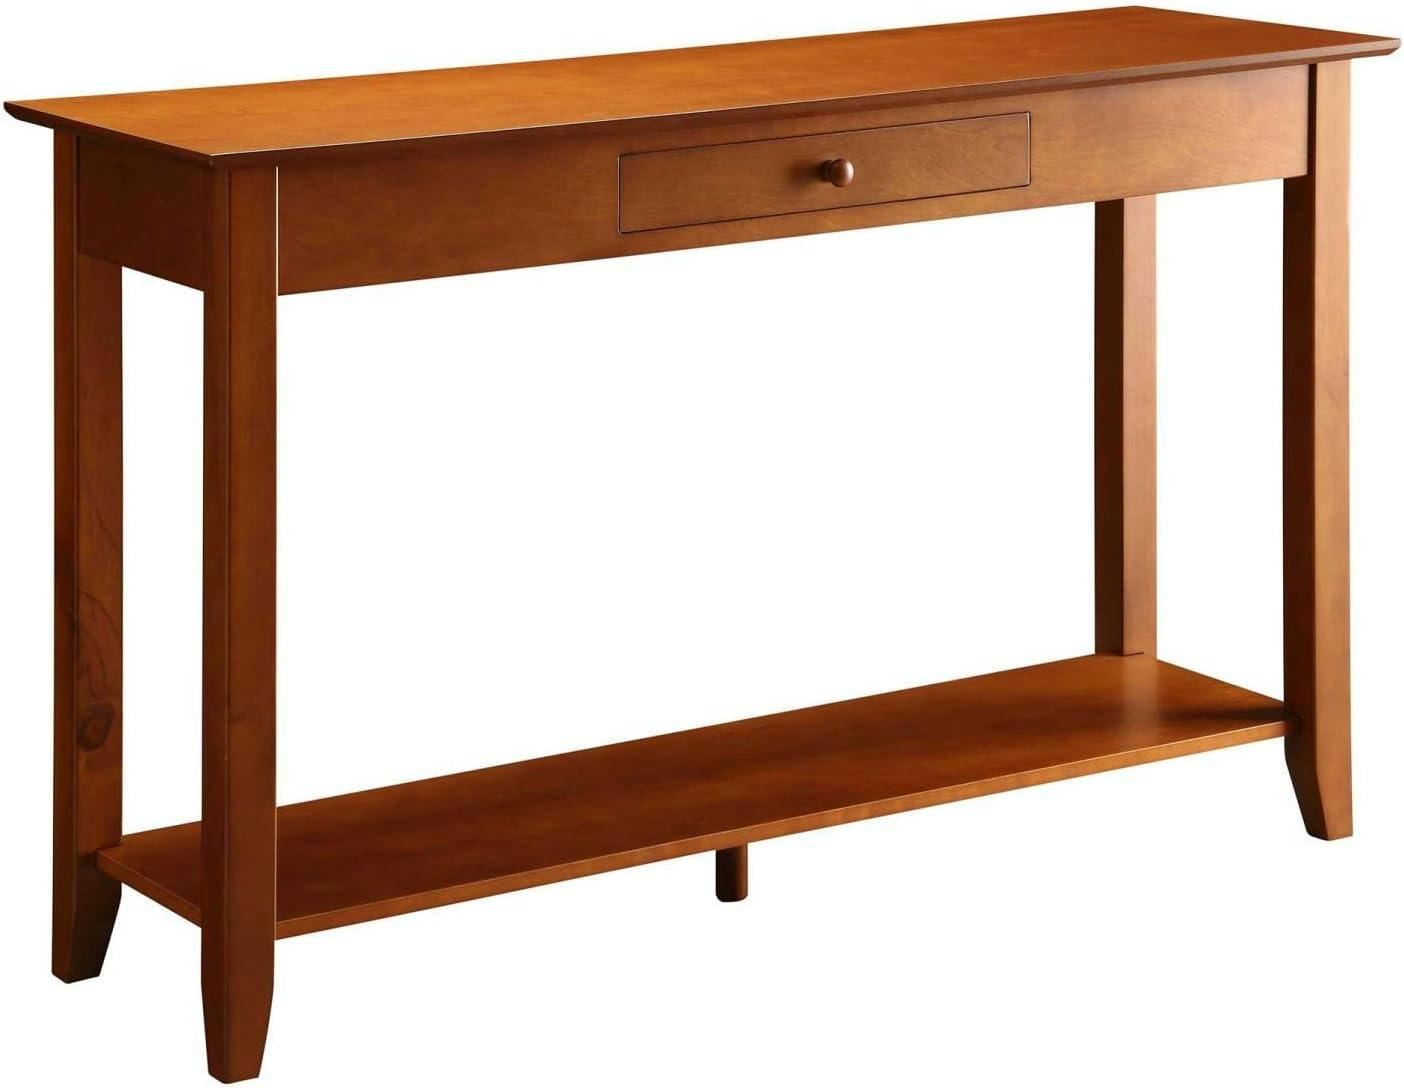 Classic American Cherry Wood Console Table with Storage Shelf